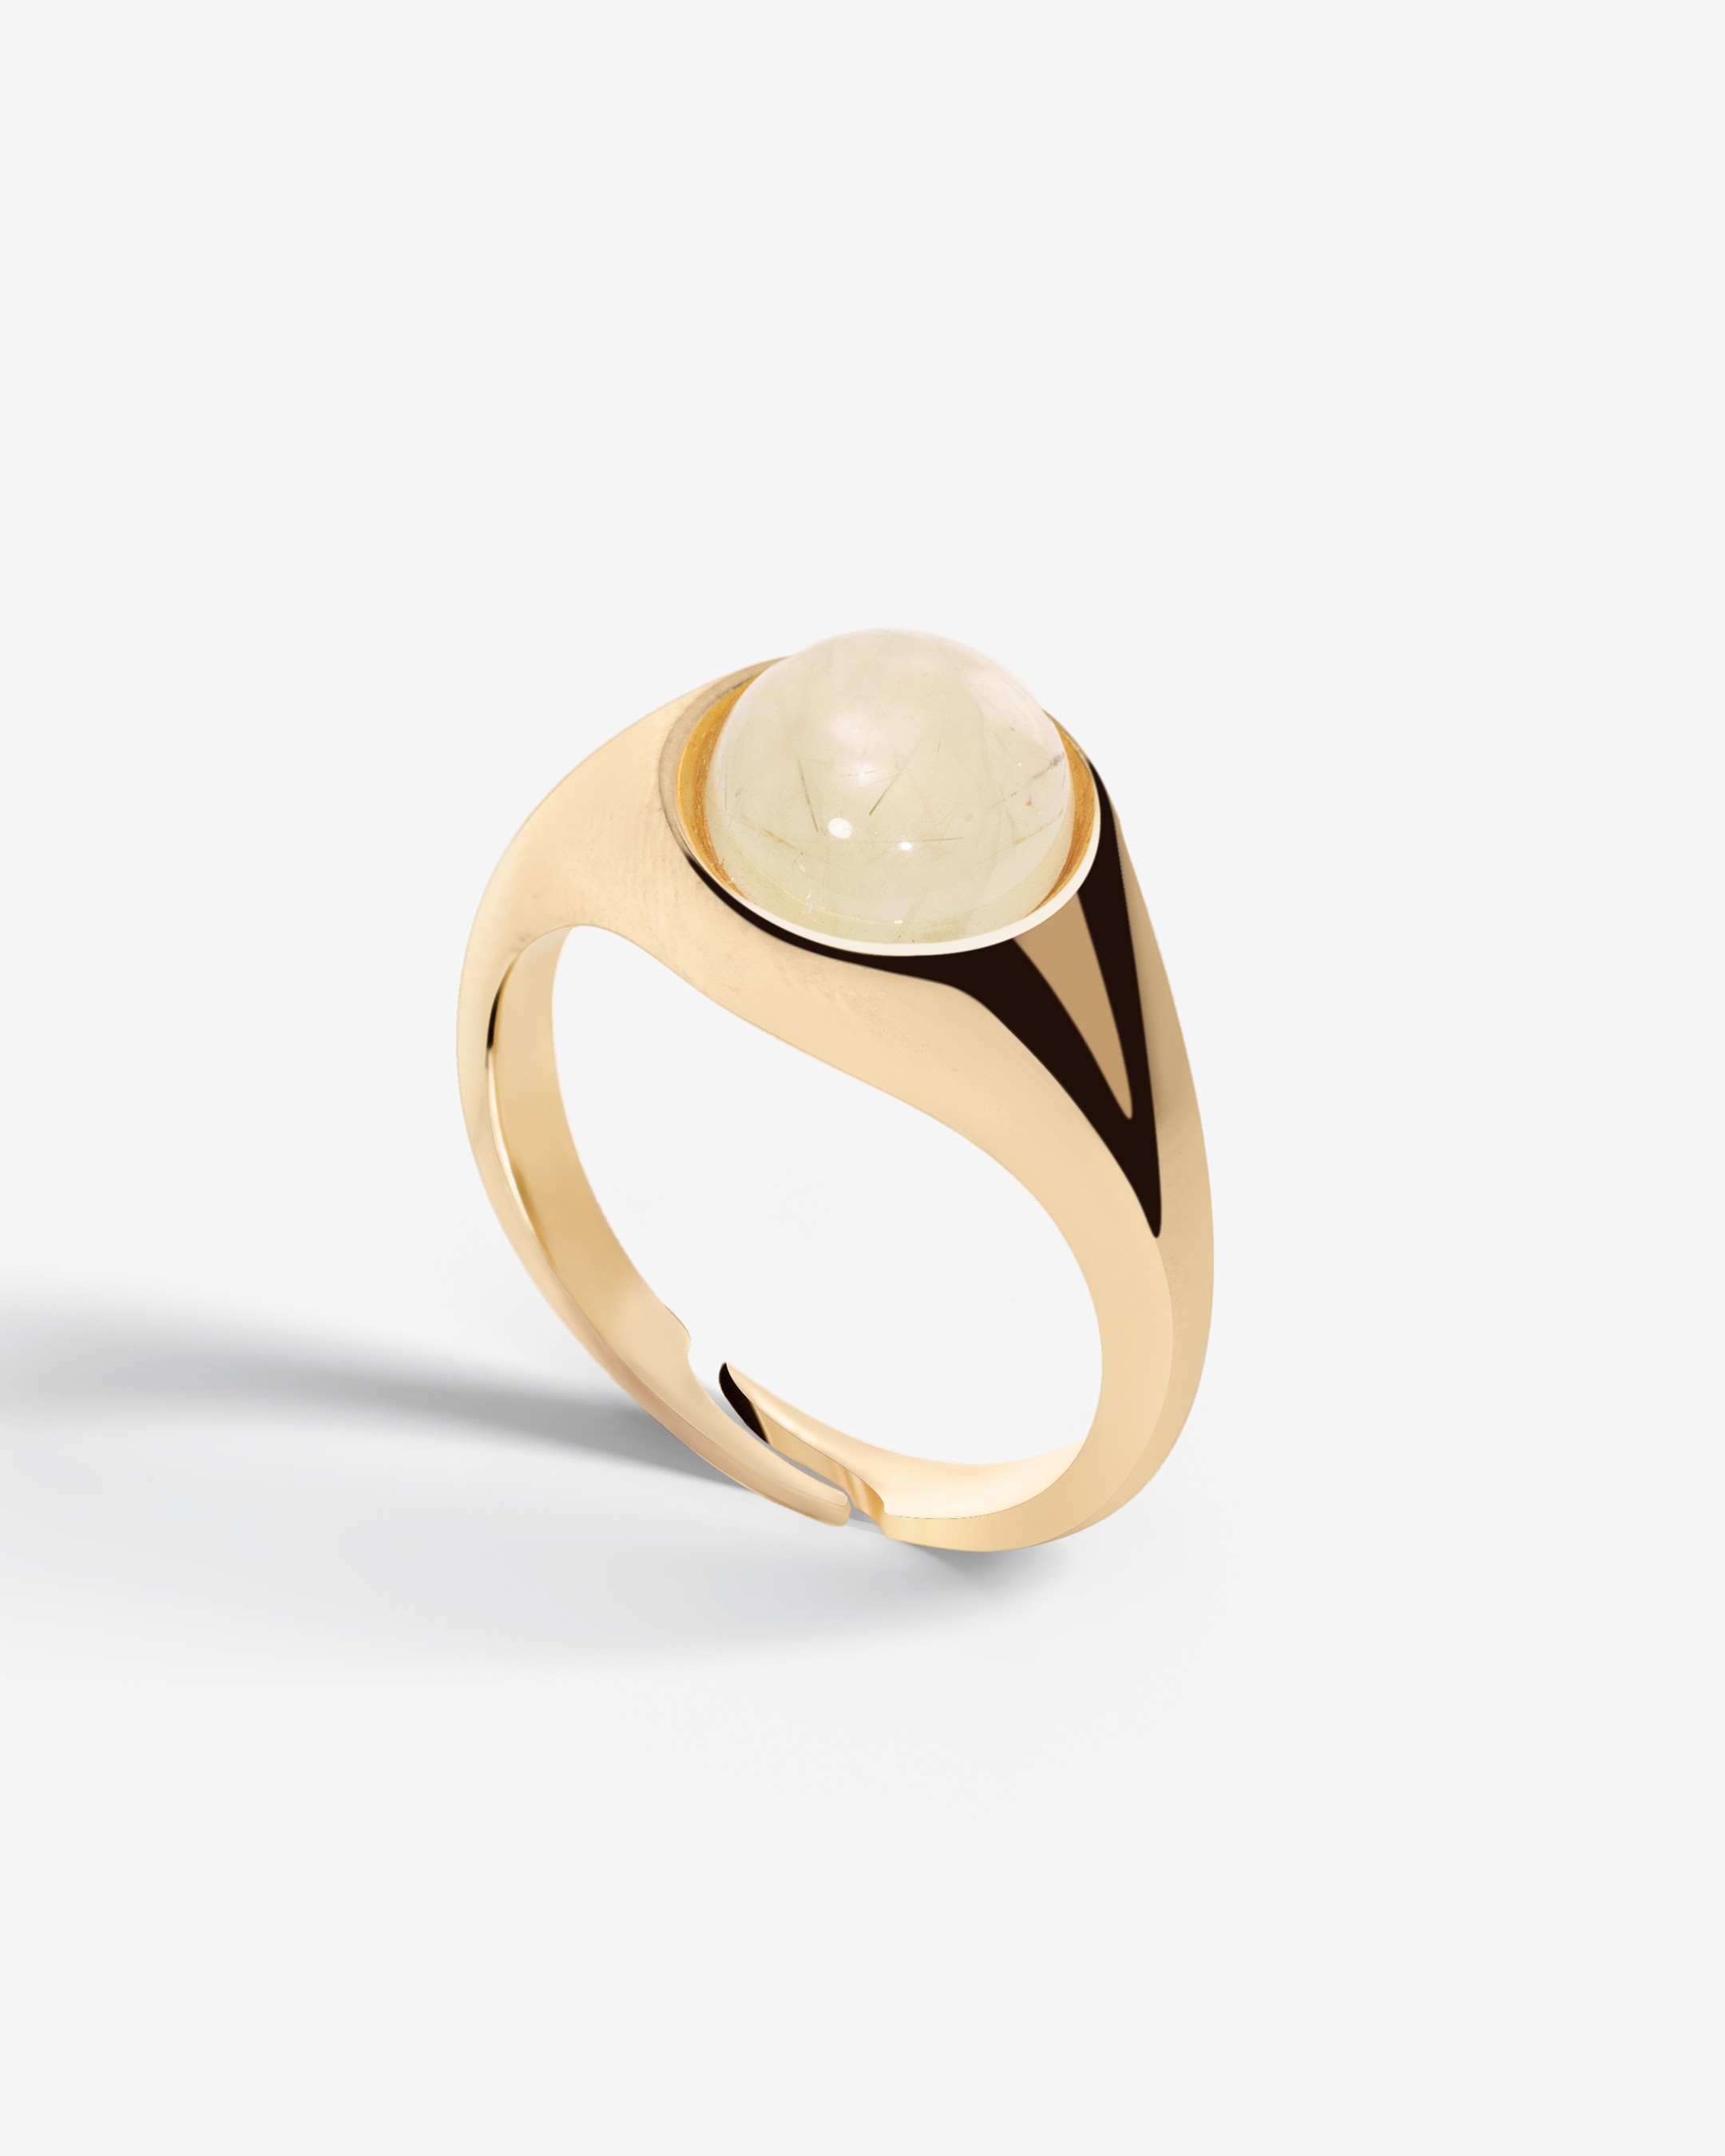 Silver Calypso Ring with Pranite Stone - Gold